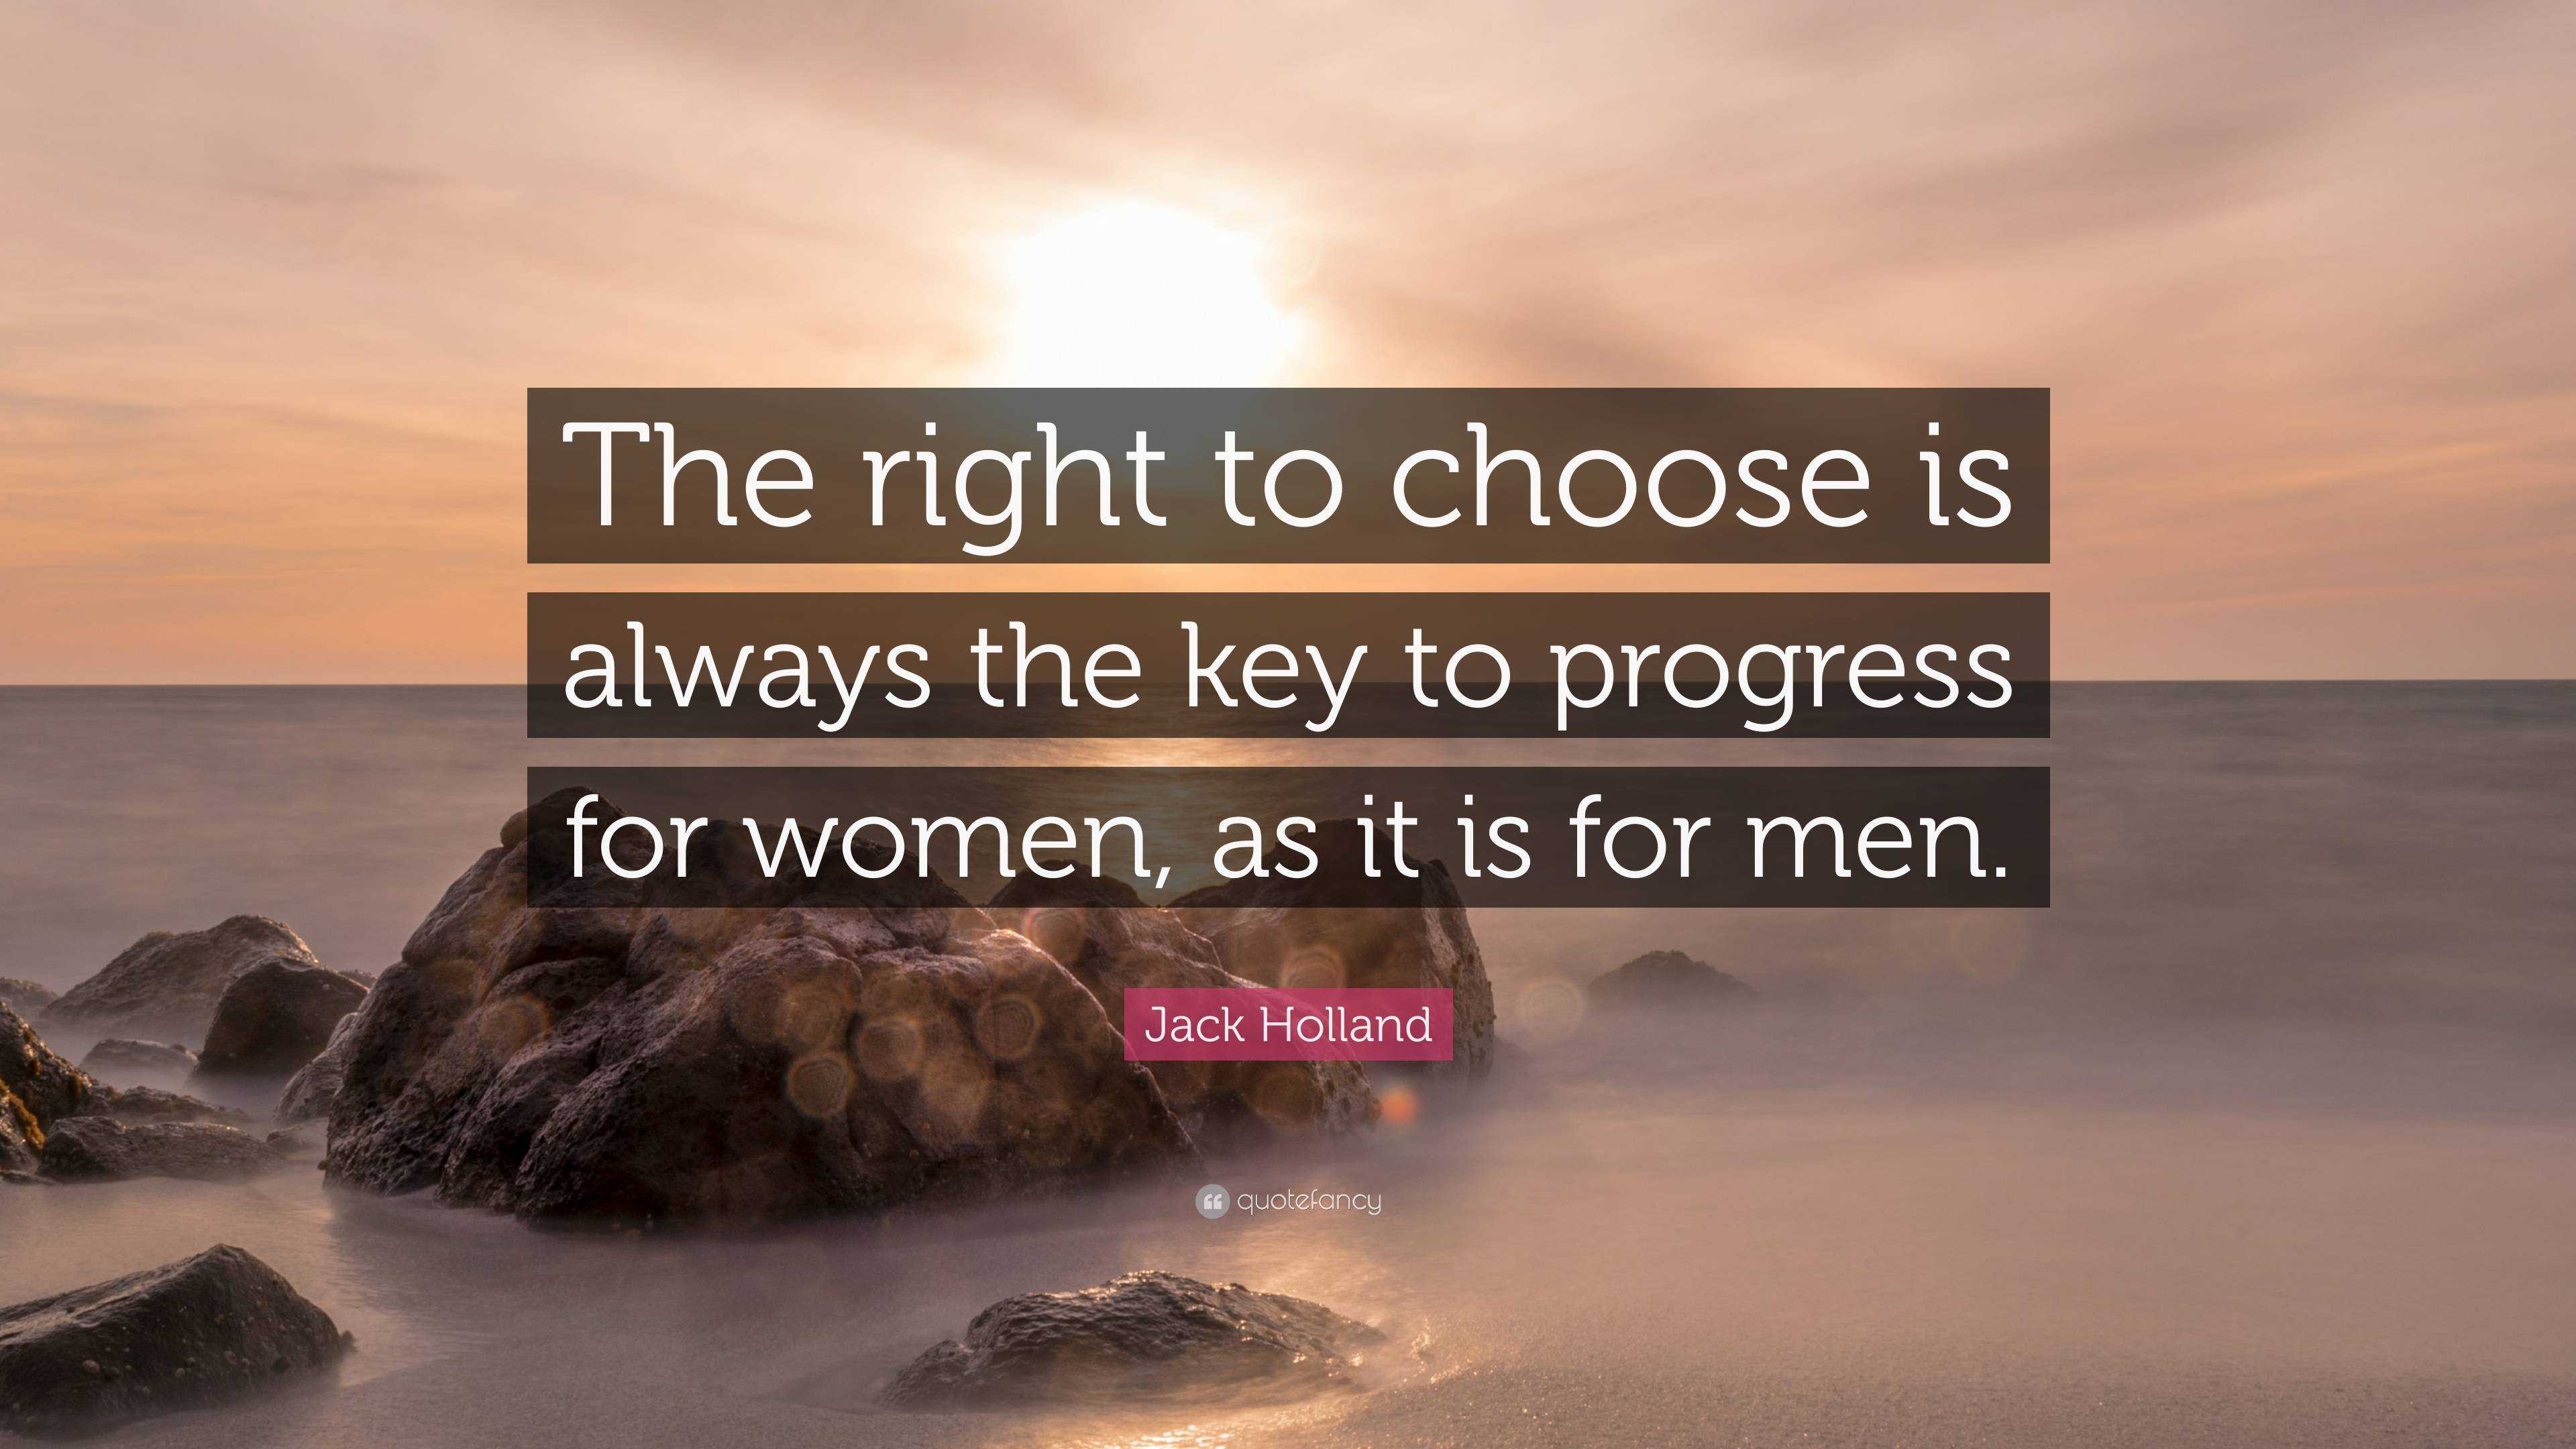 Jack Holland Quote: “The right to choose is always the key to progress ...